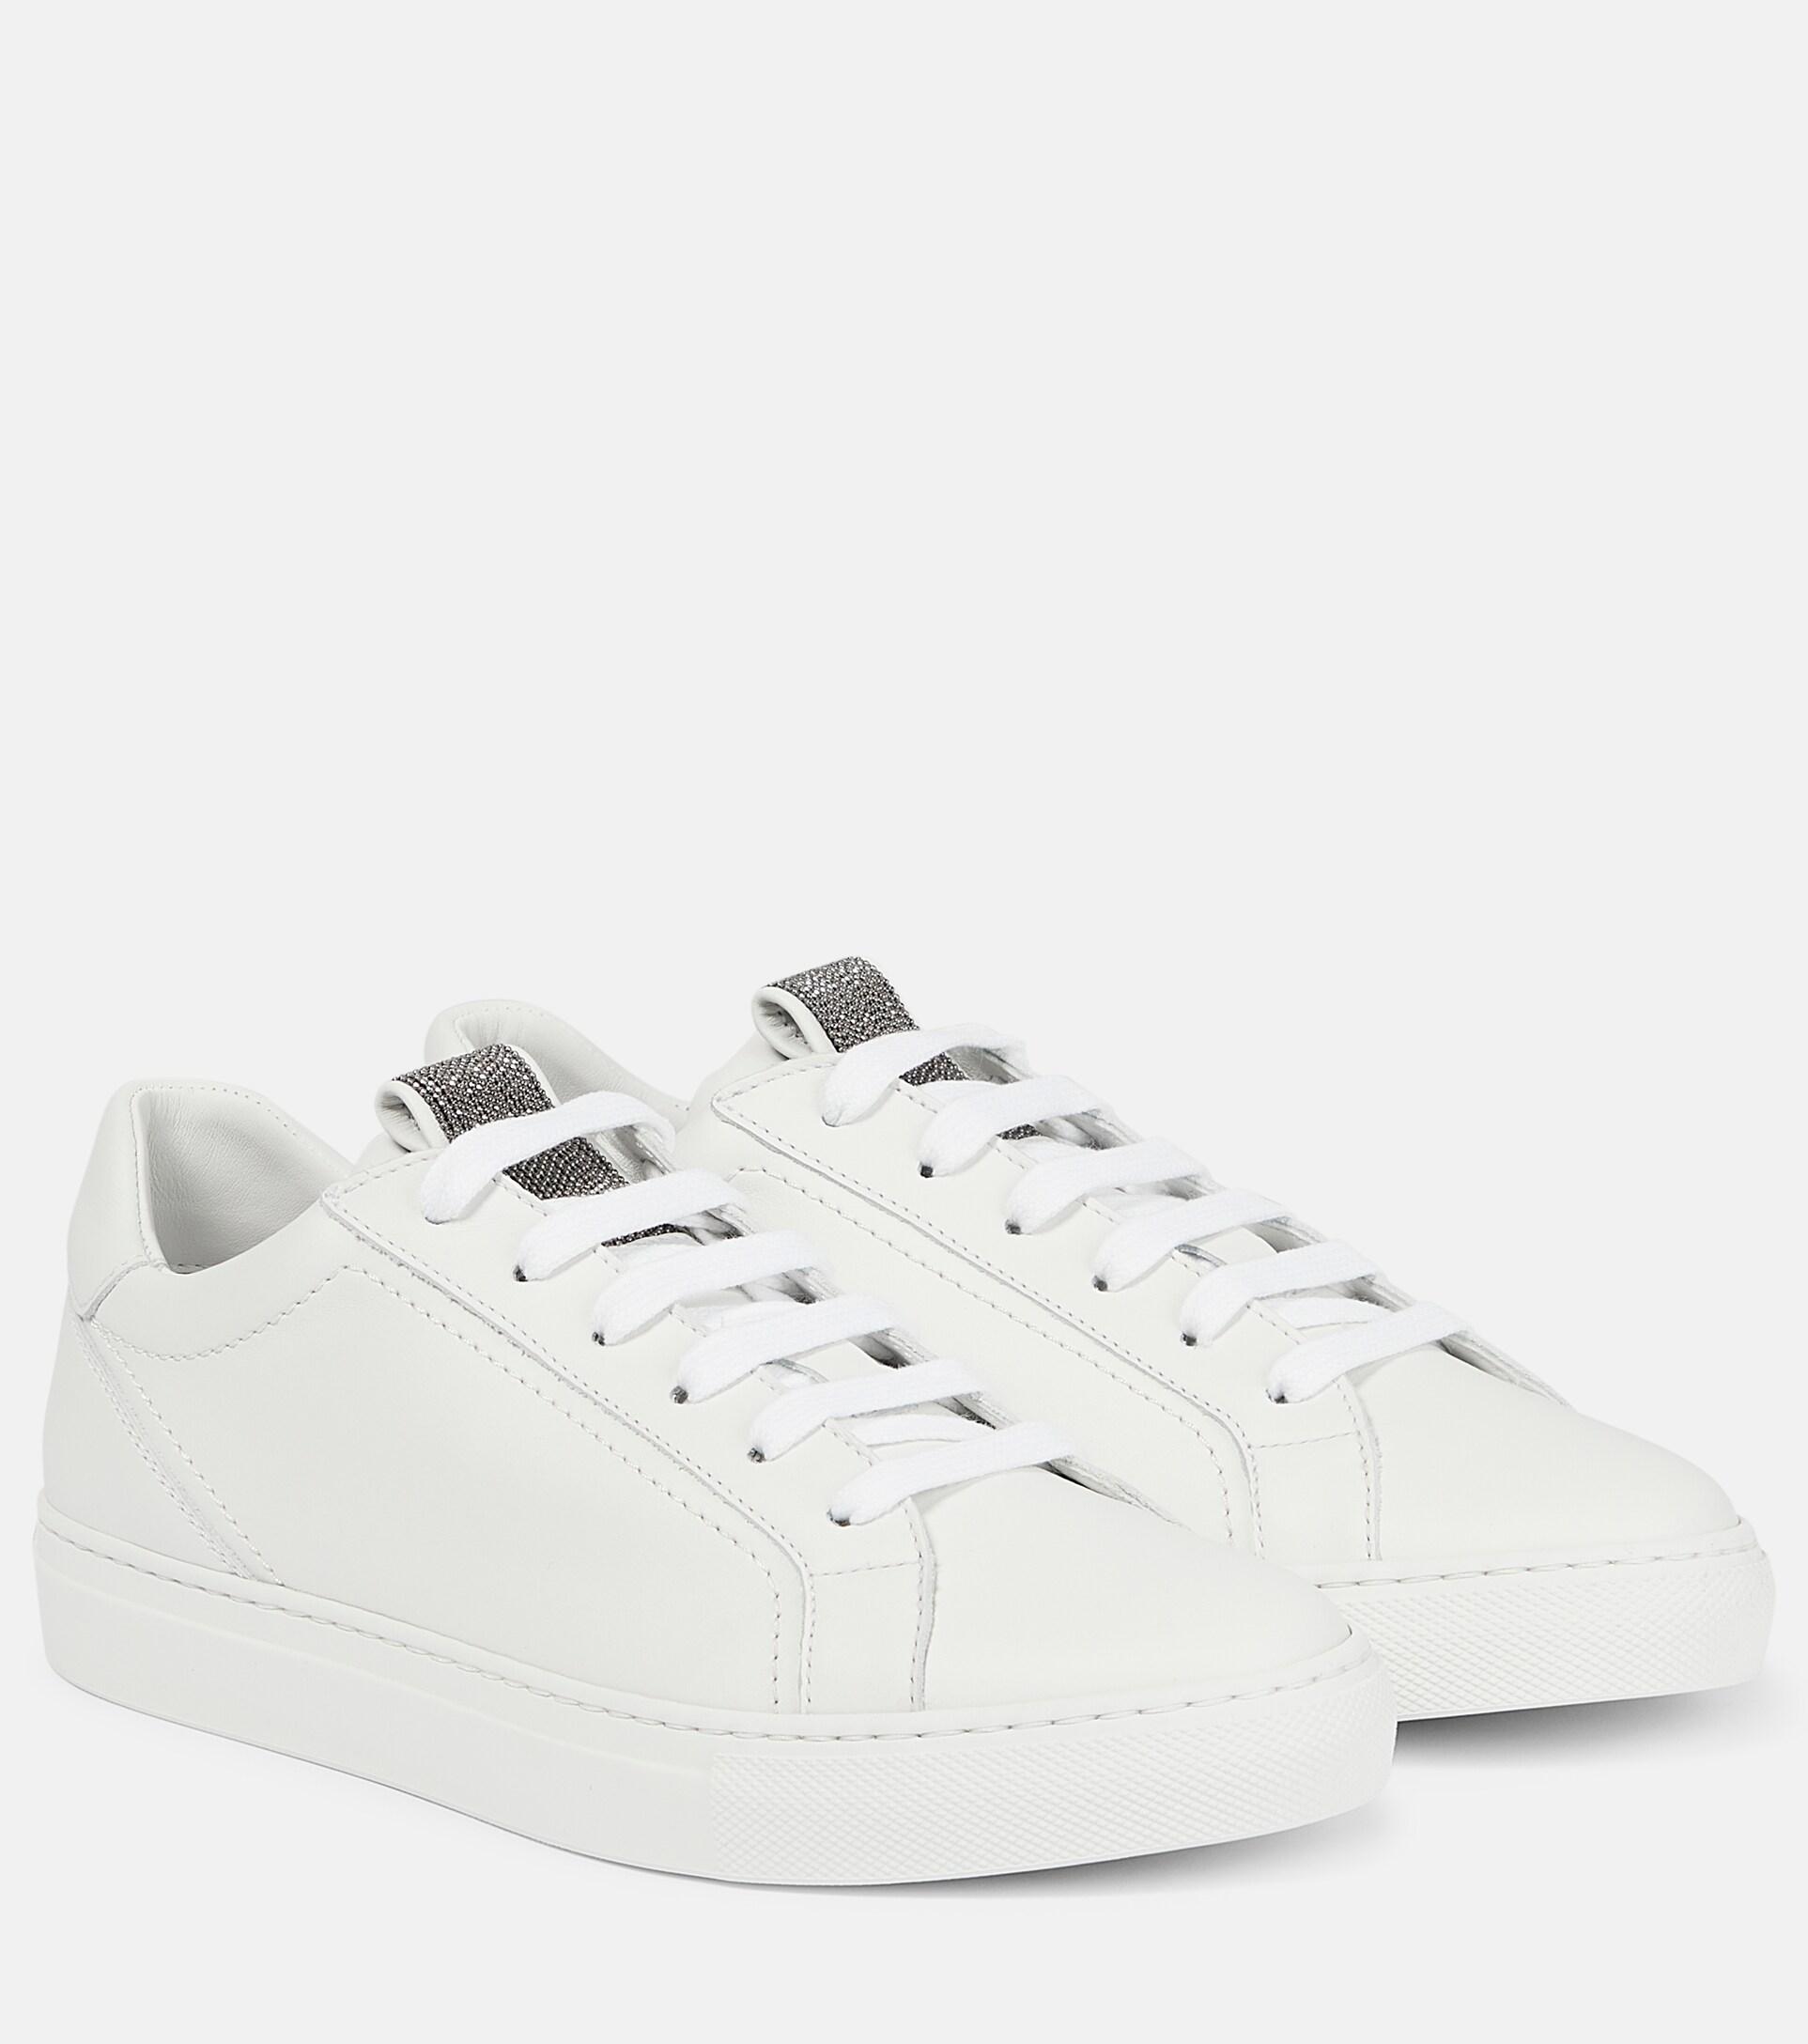 Brunello Cucinelli Leather Sneakers in White | Lyst